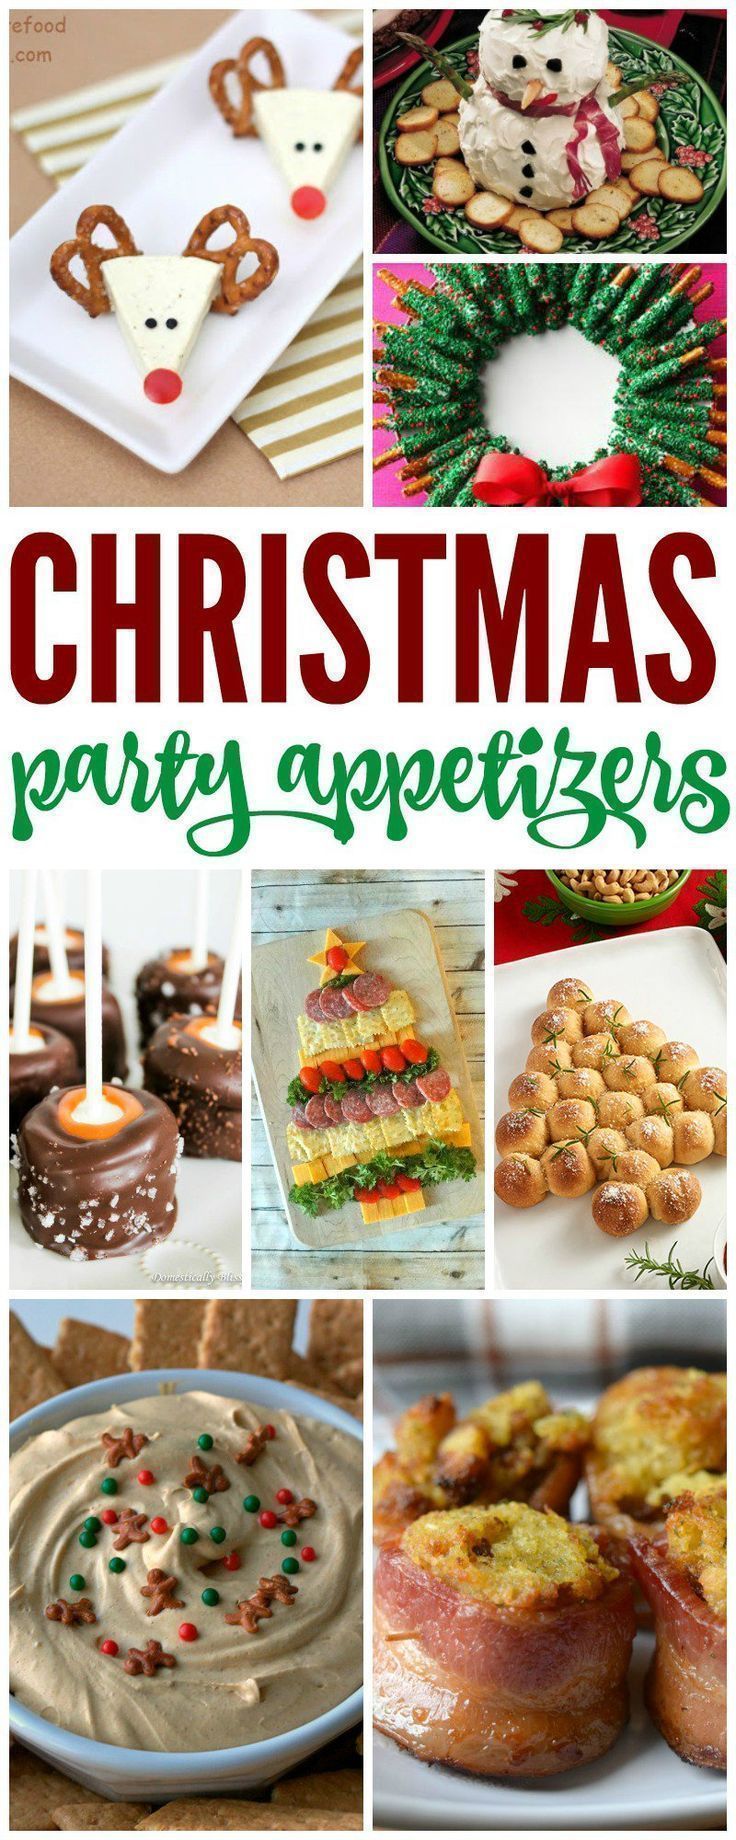 20 Simple Christmas Party Appetizers -   17 holiday Party home ideas